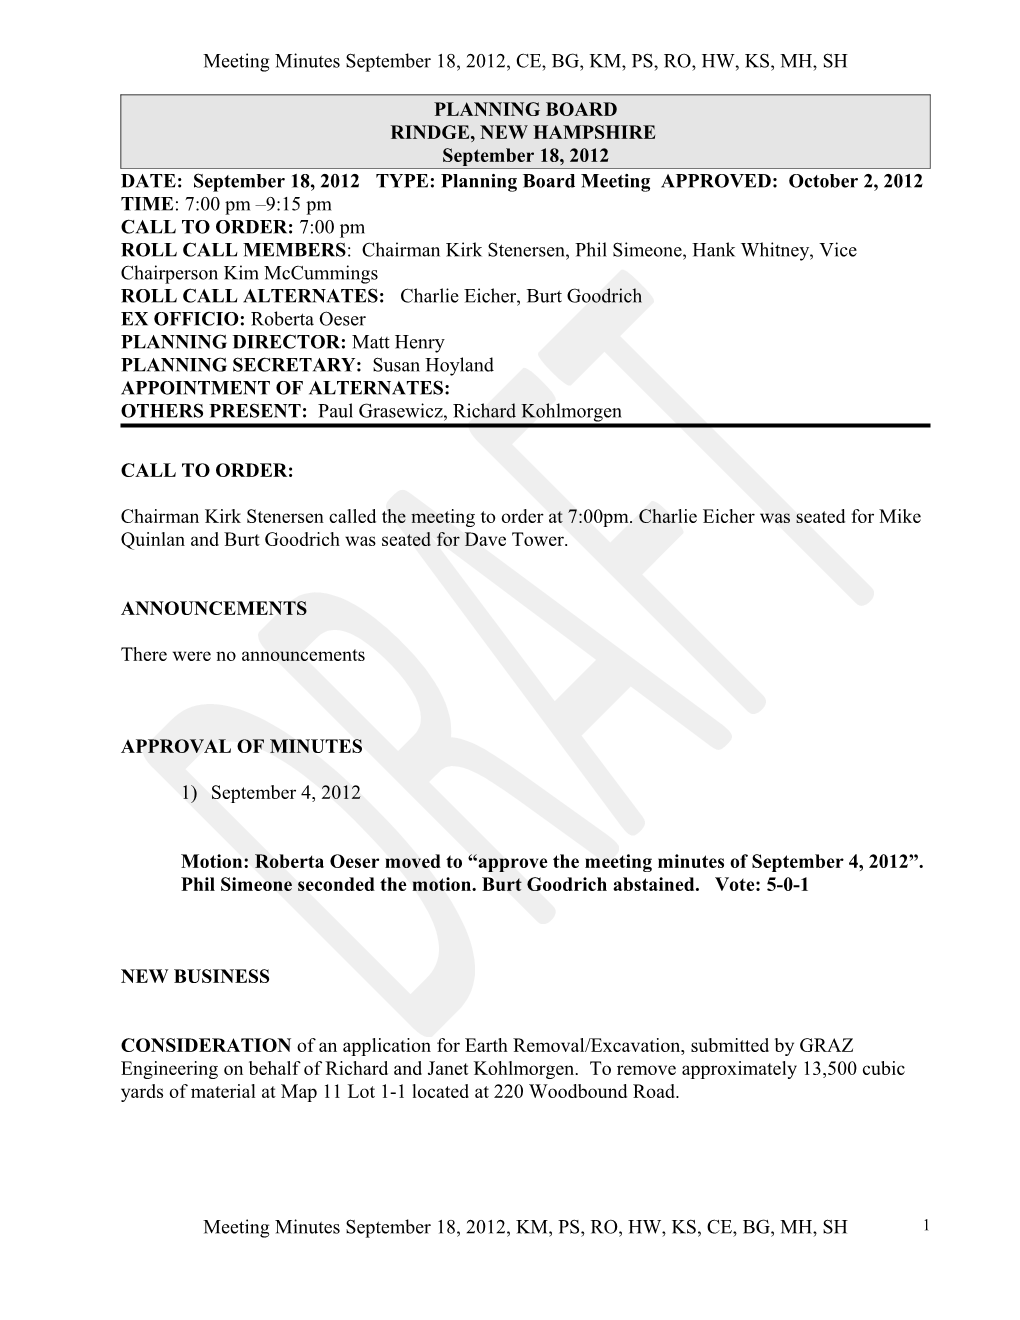 Planning Board Minutes s1